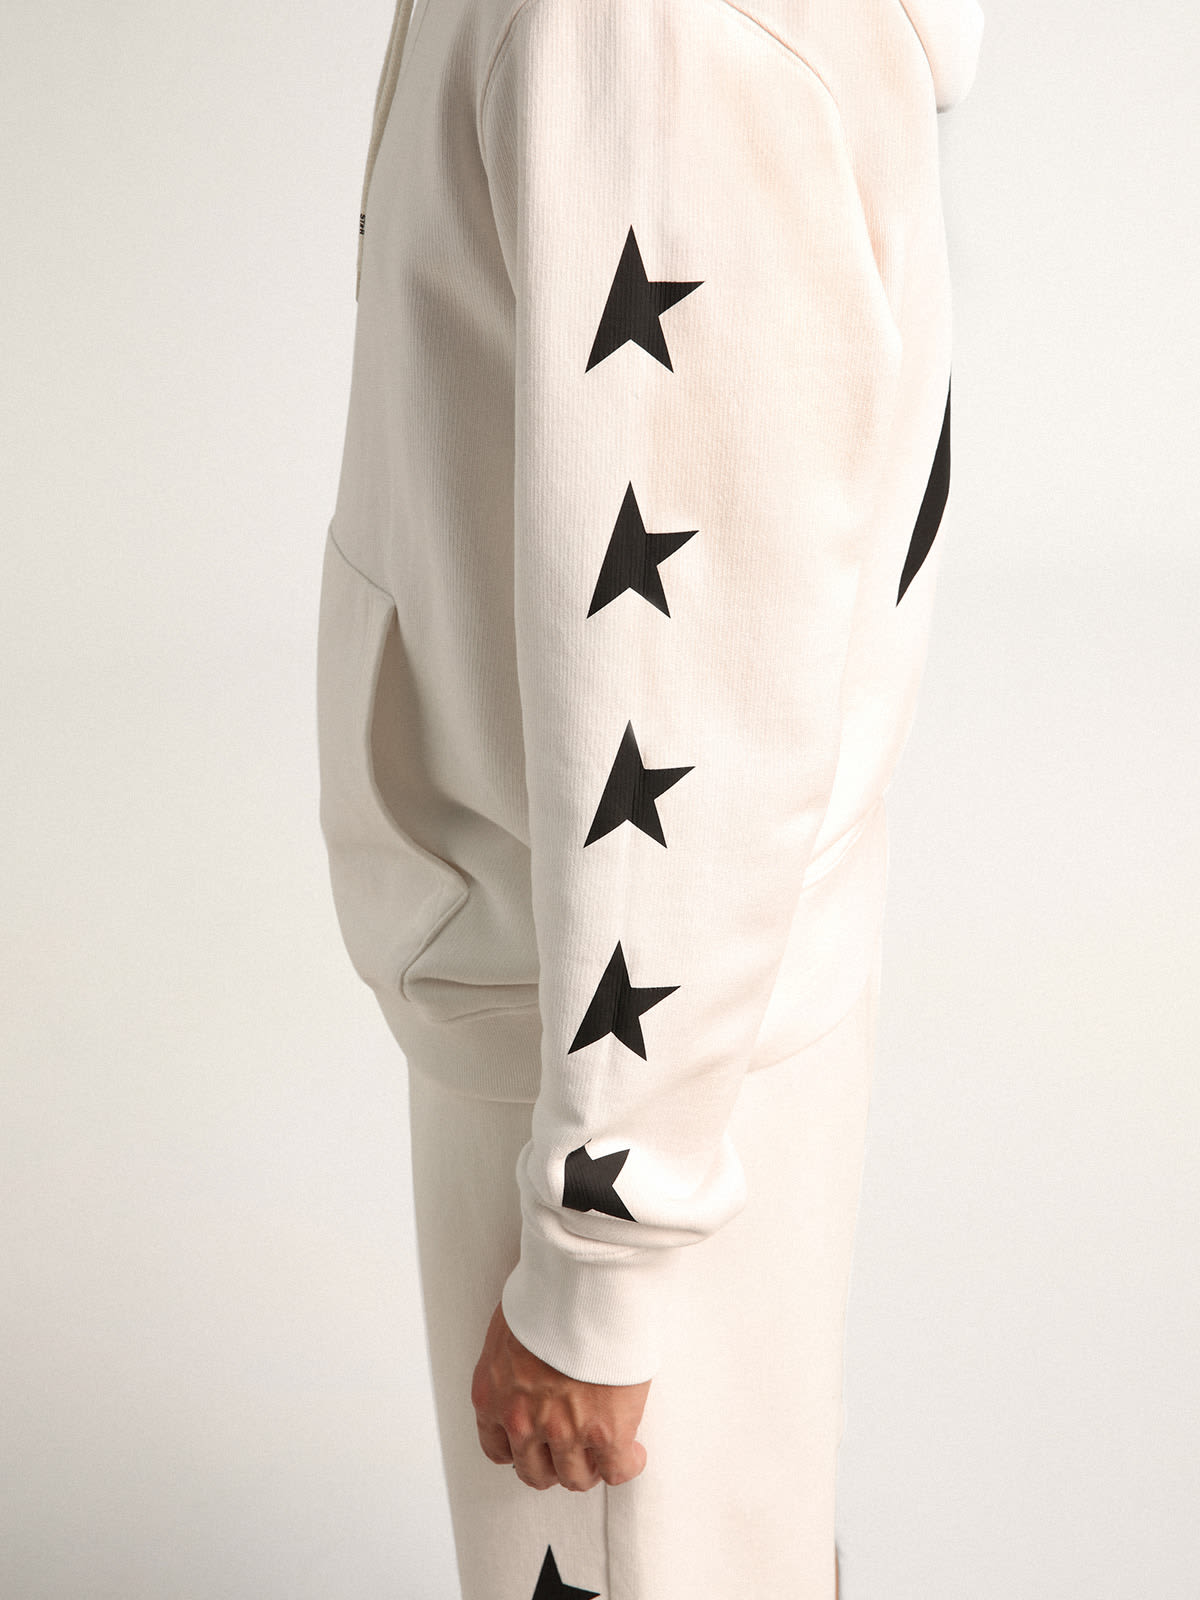 Golden Goose - Alighiero Star Collection hooded sweatshirt in vintage white with contrasting black stars in 